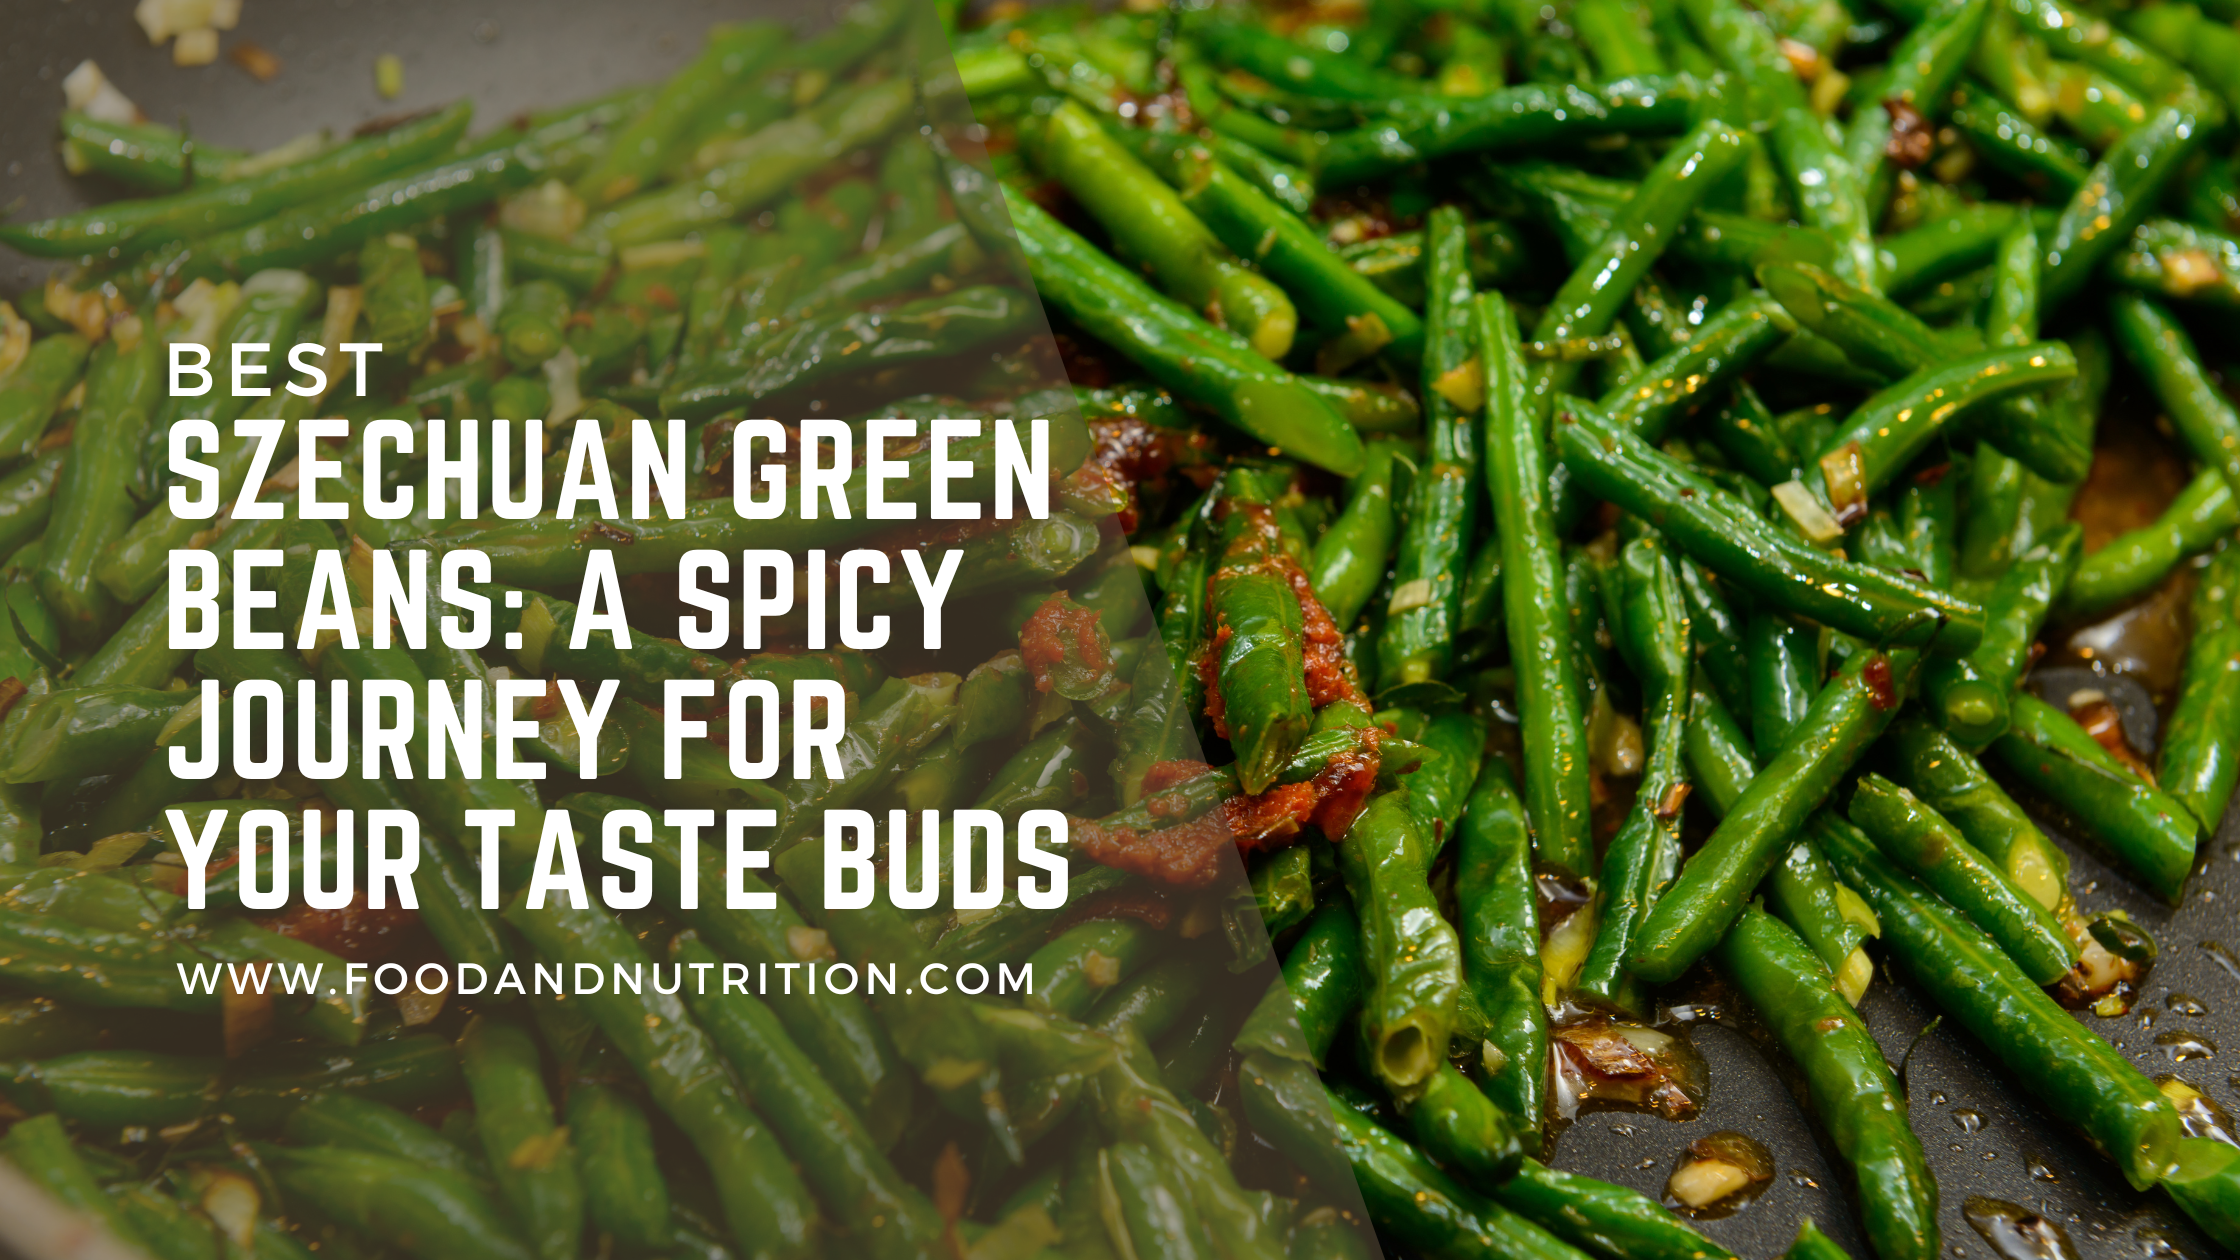 Szechuan Green Beans: A Spicy Journey for Your Taste Buds